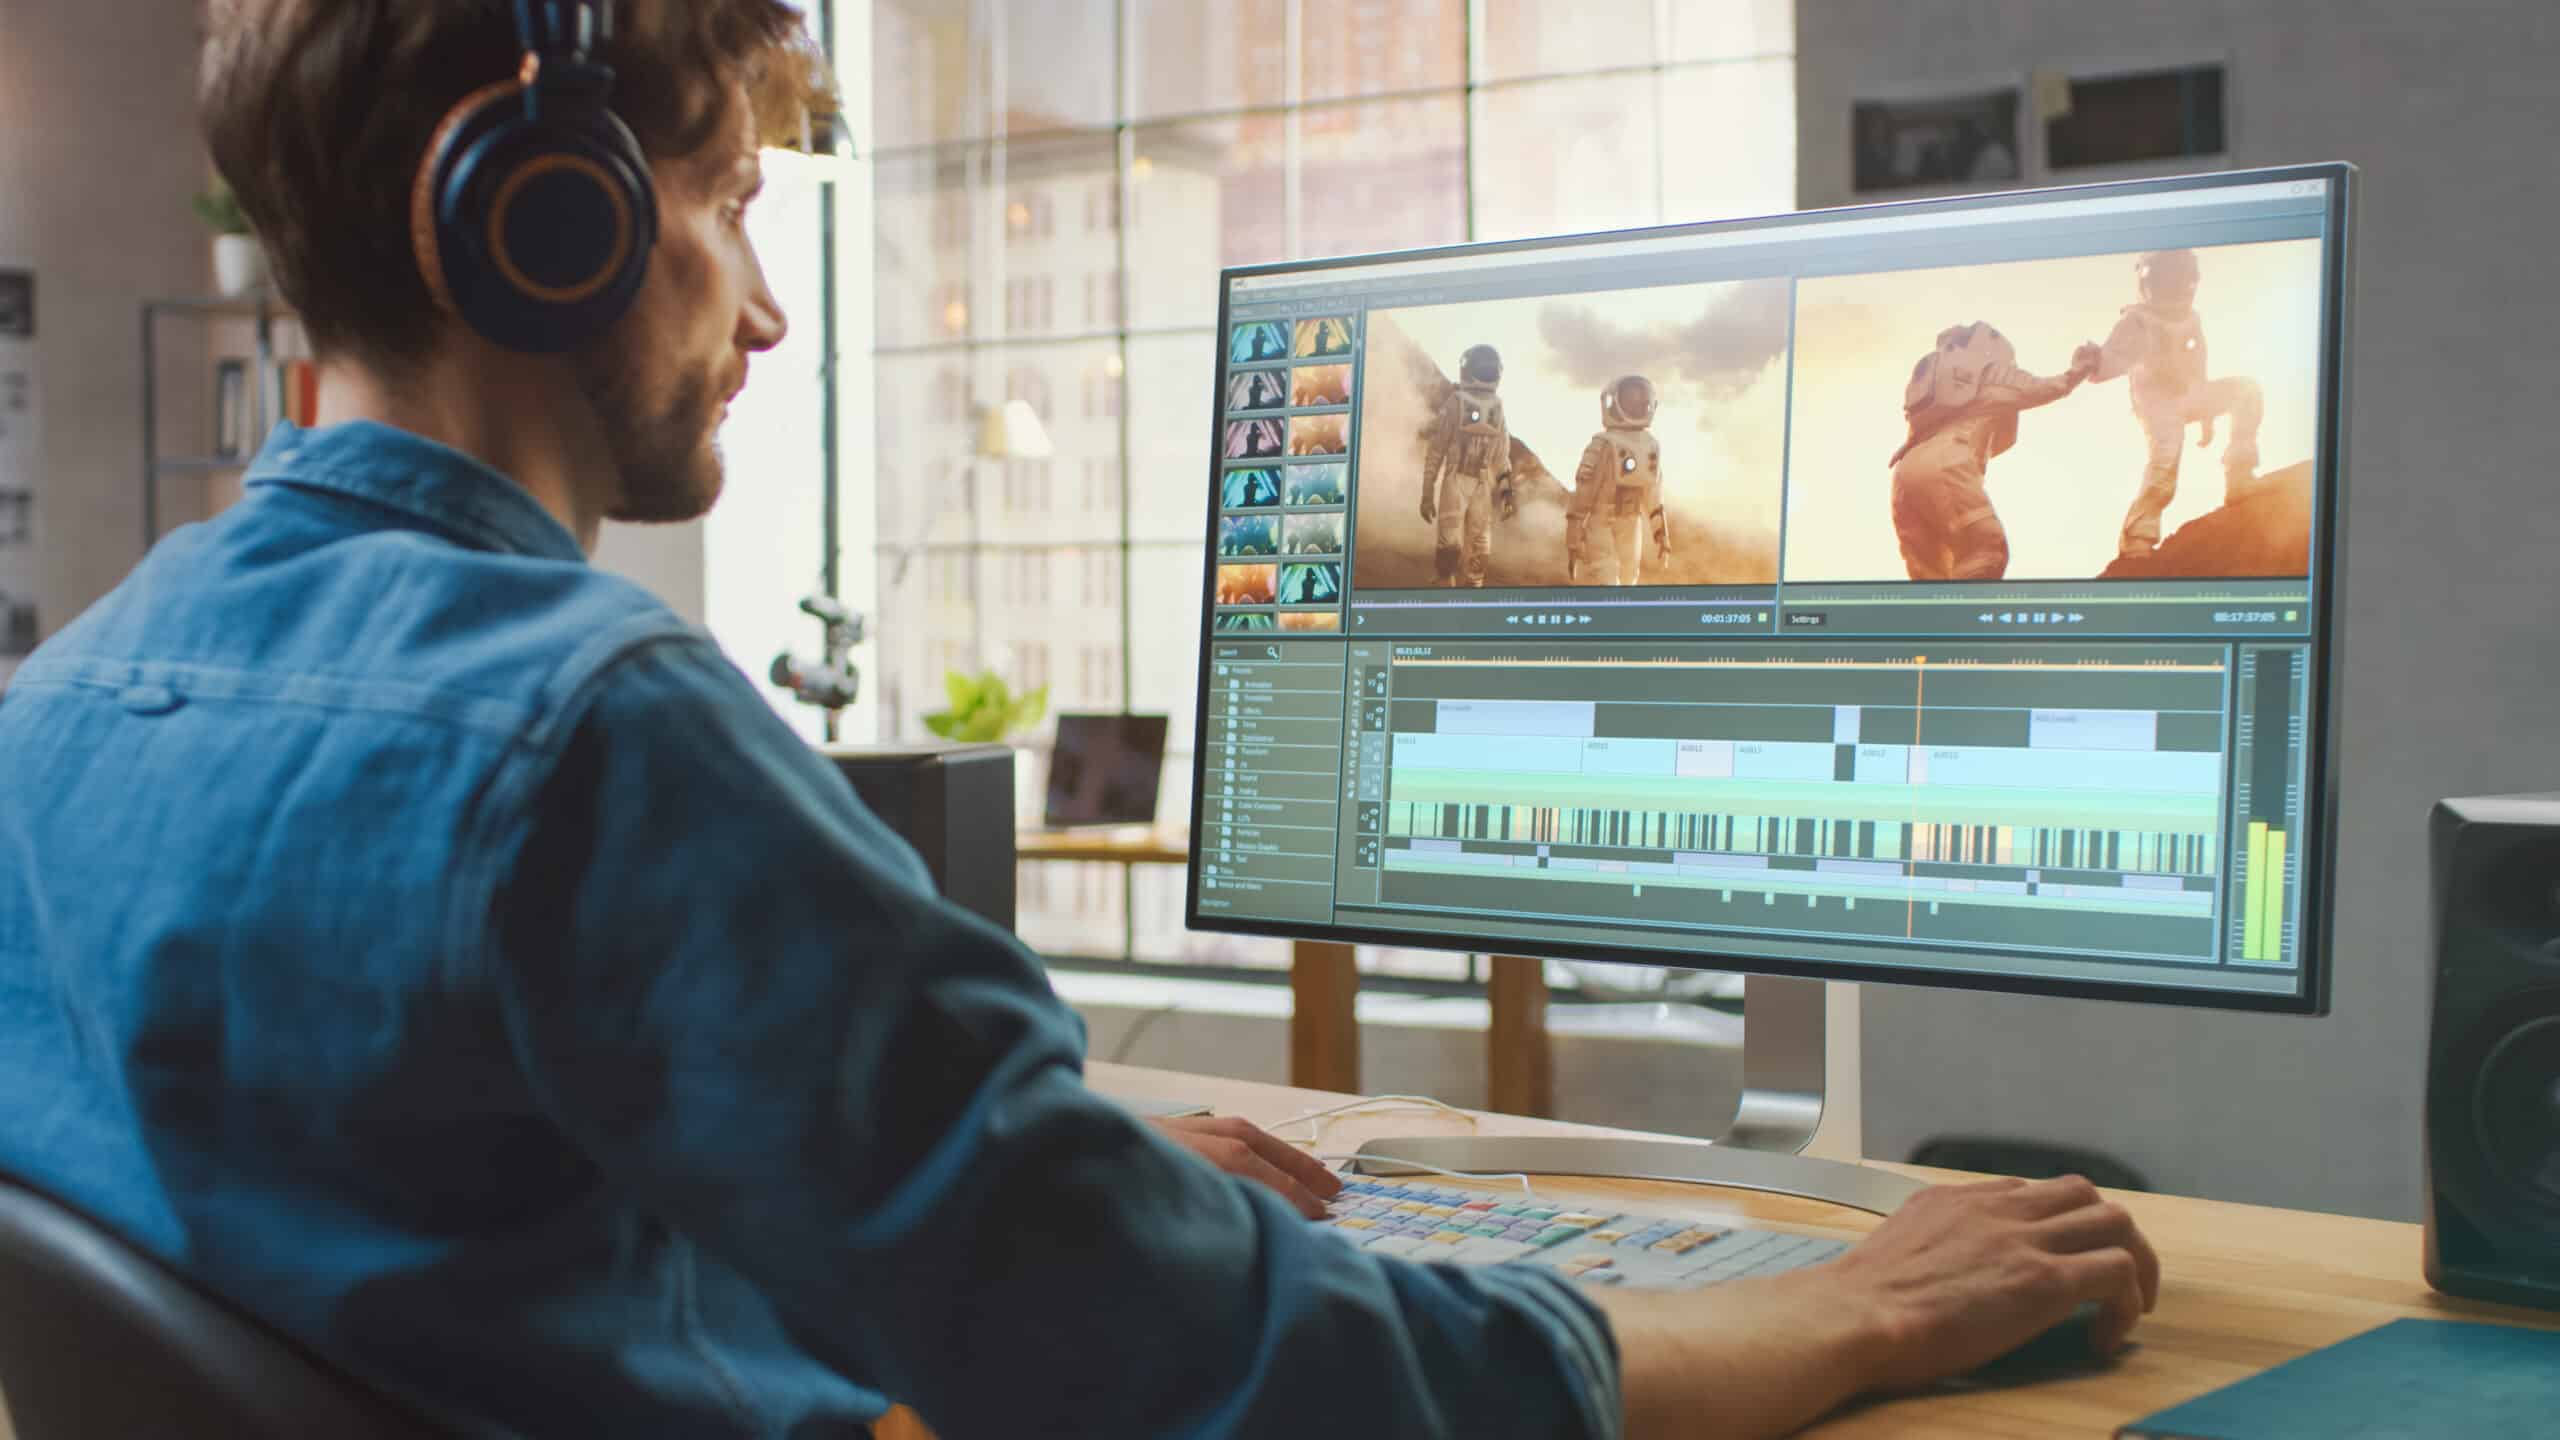 best youtube video editing apps